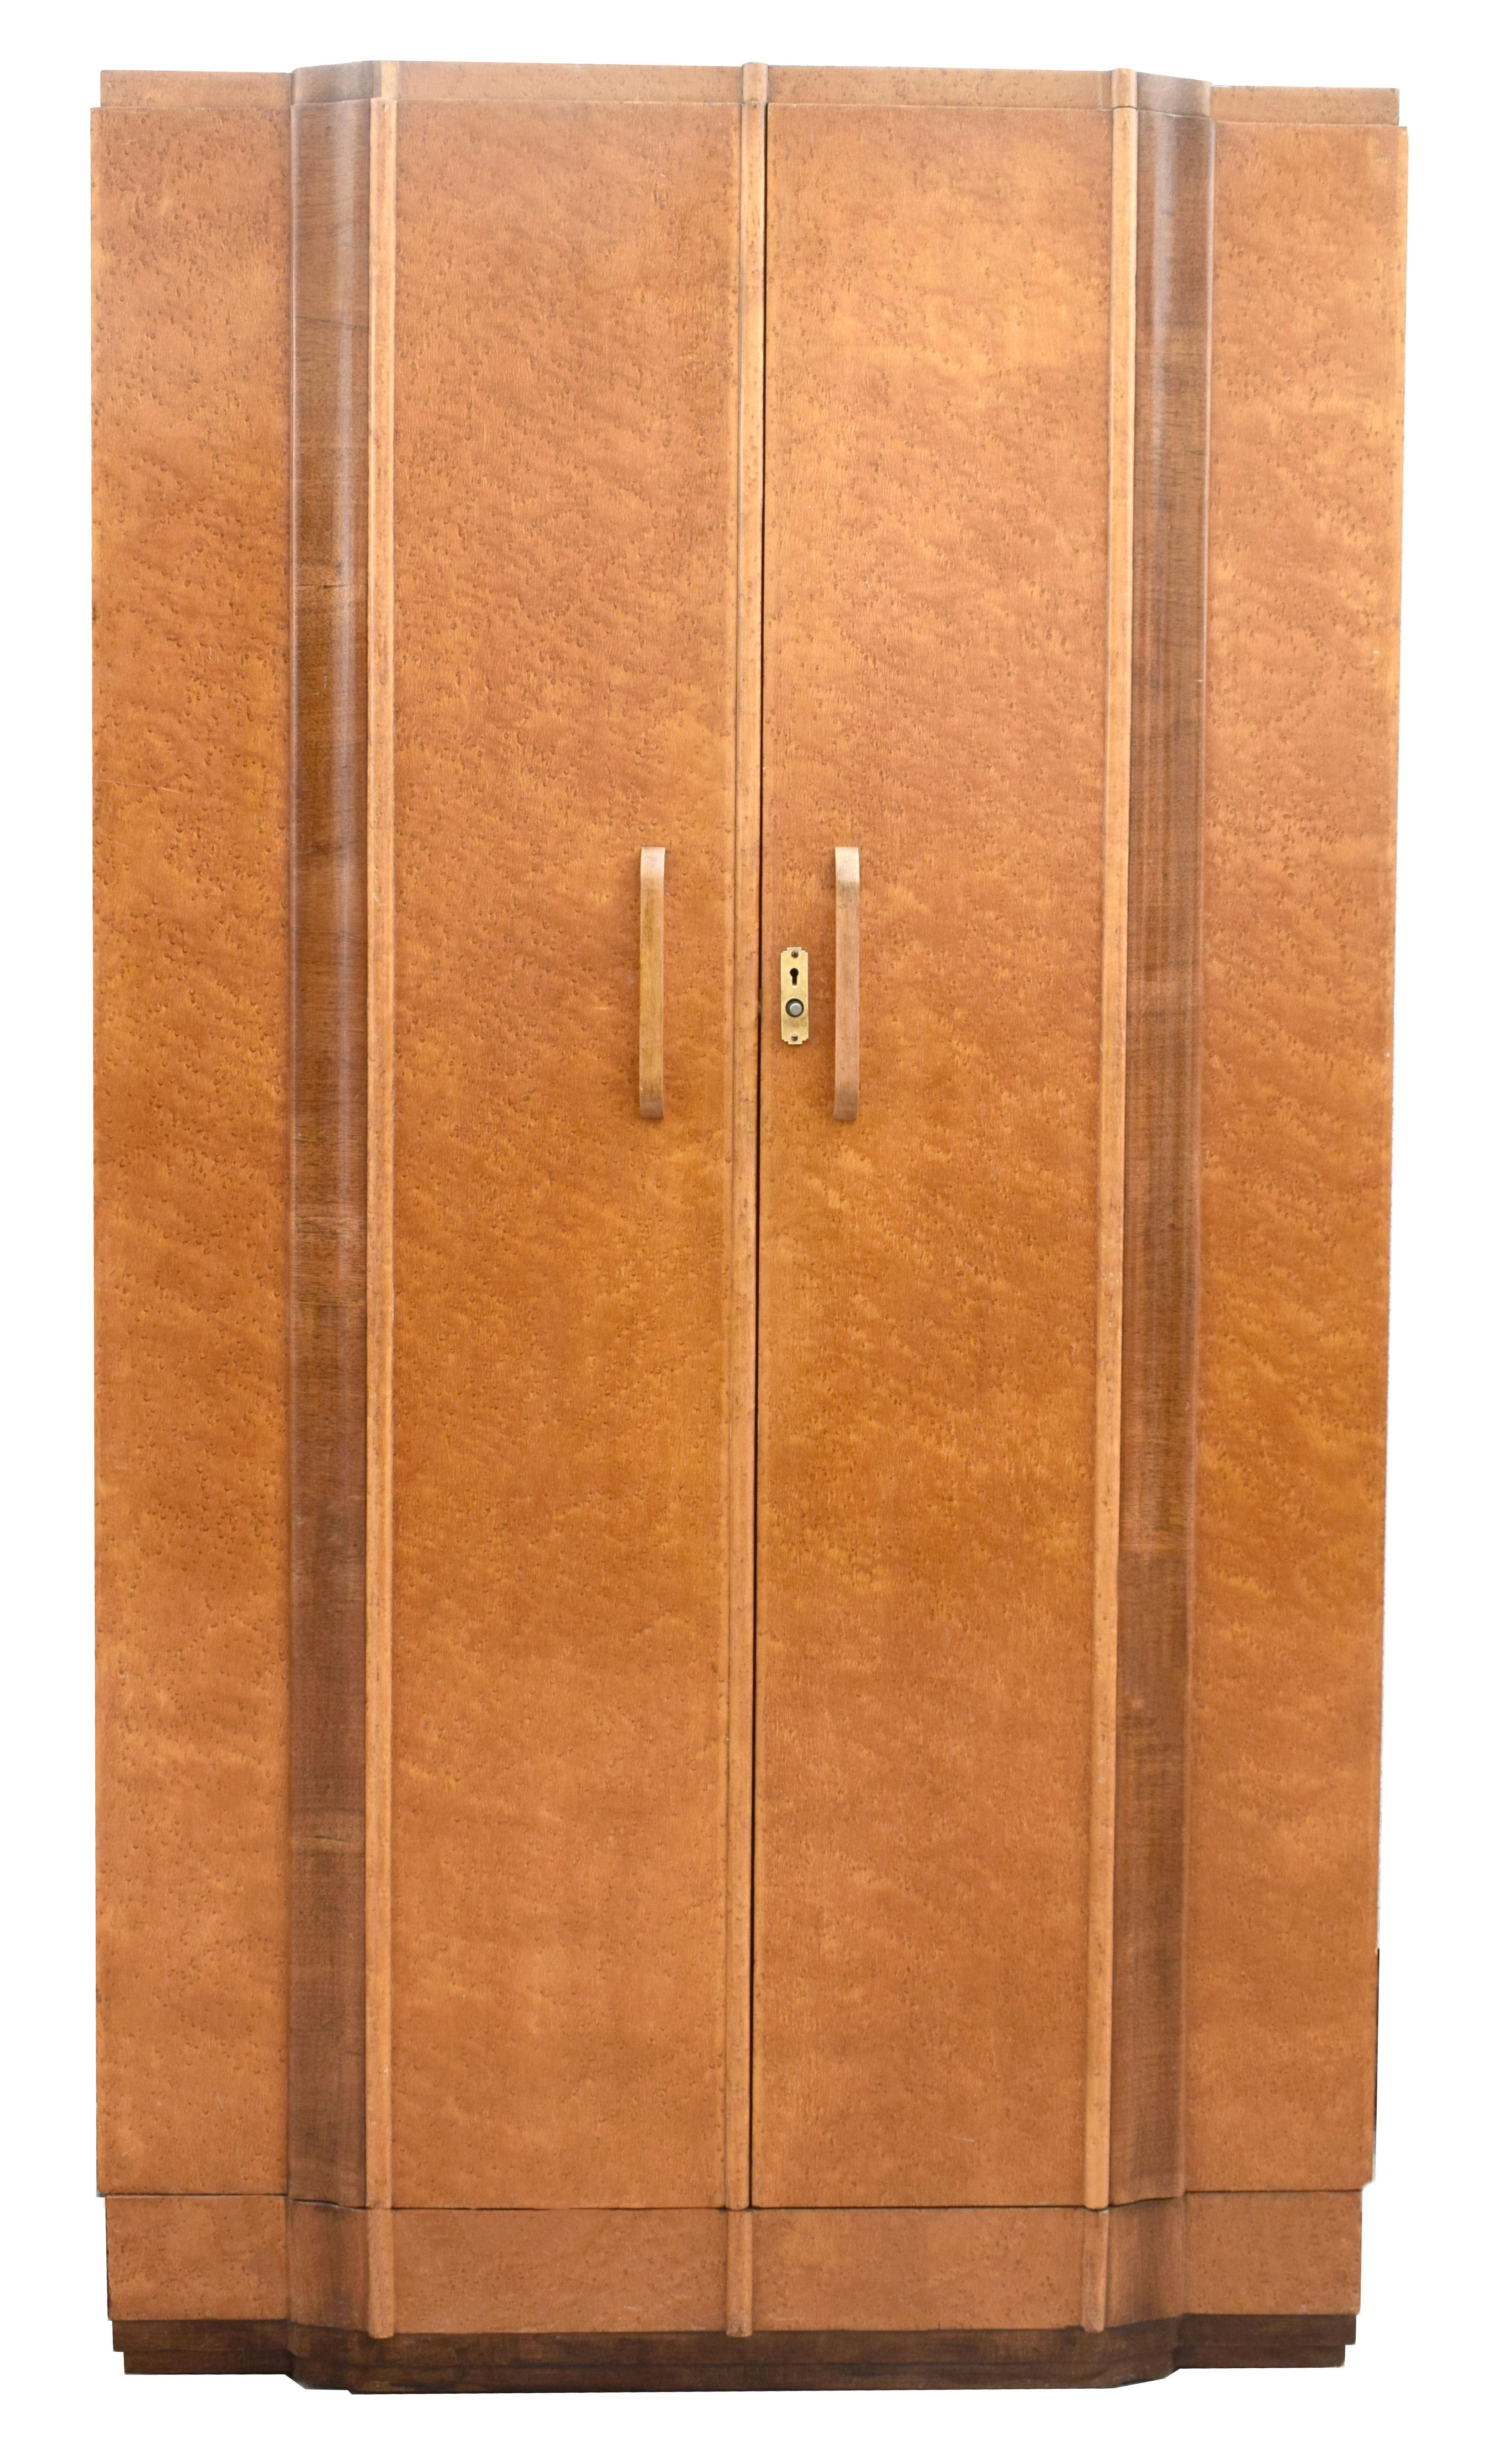 Superb and totally original is this 1930s Art Deco two-door maple wardrobe in a light blonde bird's-eye maple veneer. Not only does this wardrobe look impressive but it's extremely generous in the storage it provides. Offering three good sized cubed